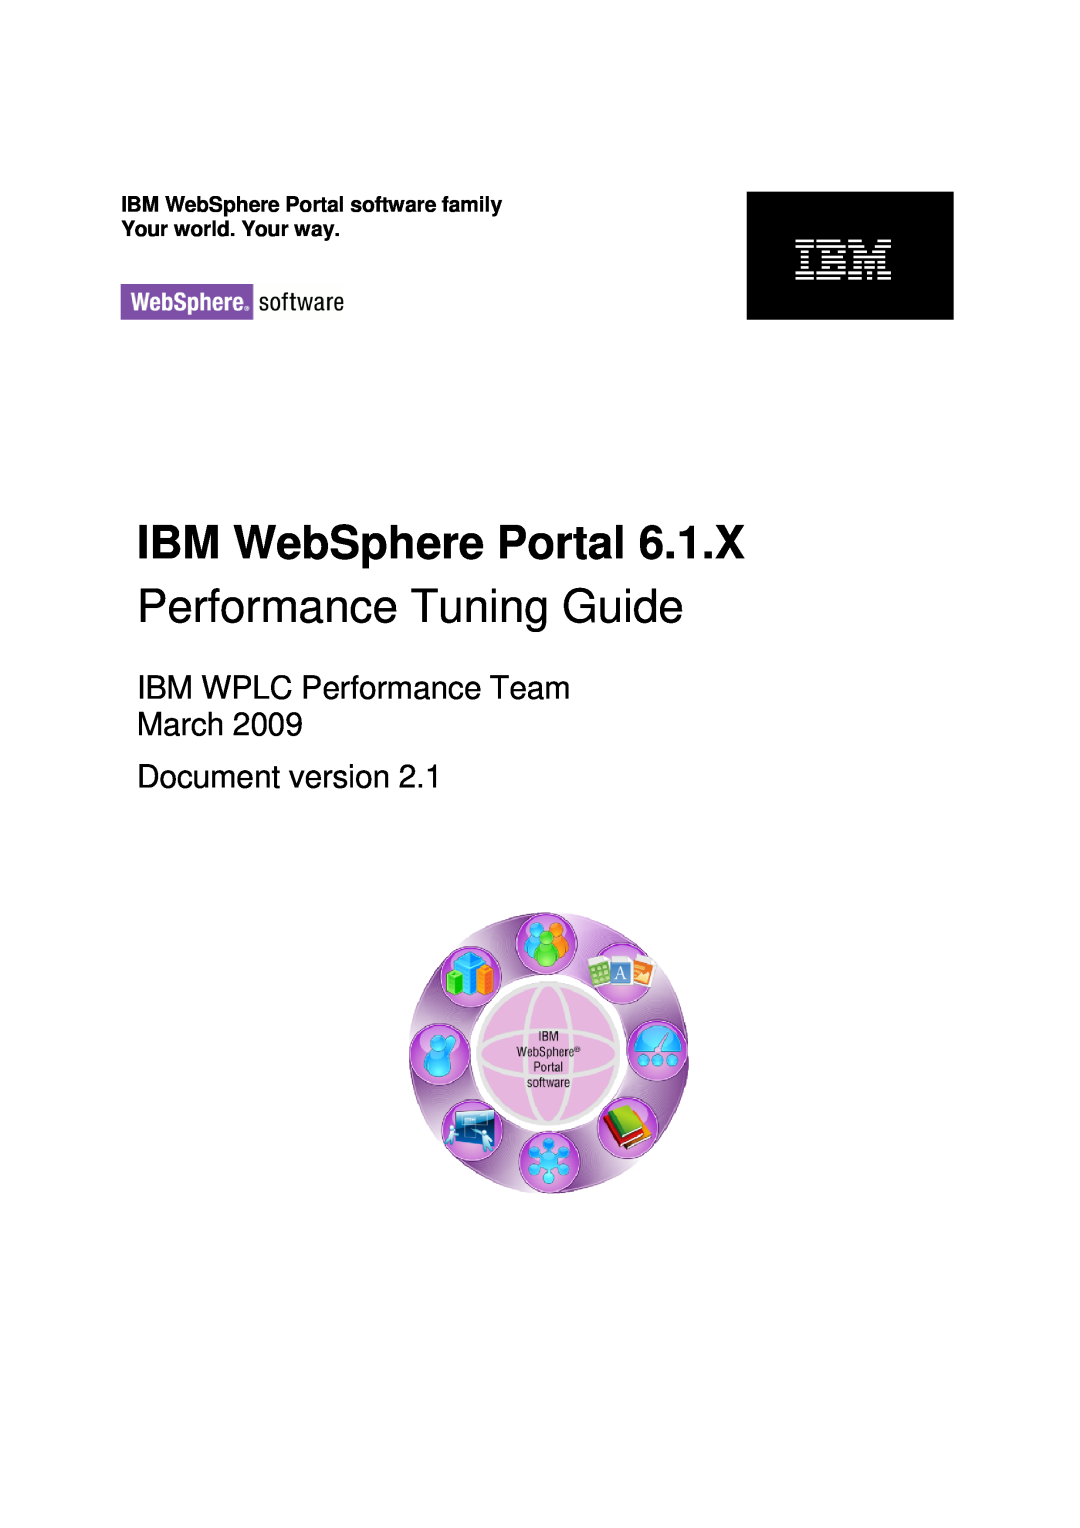 IBM 6.1.X manual IBM WebSphere Portal software family Your world. Your way, Performance Tuning Guide 